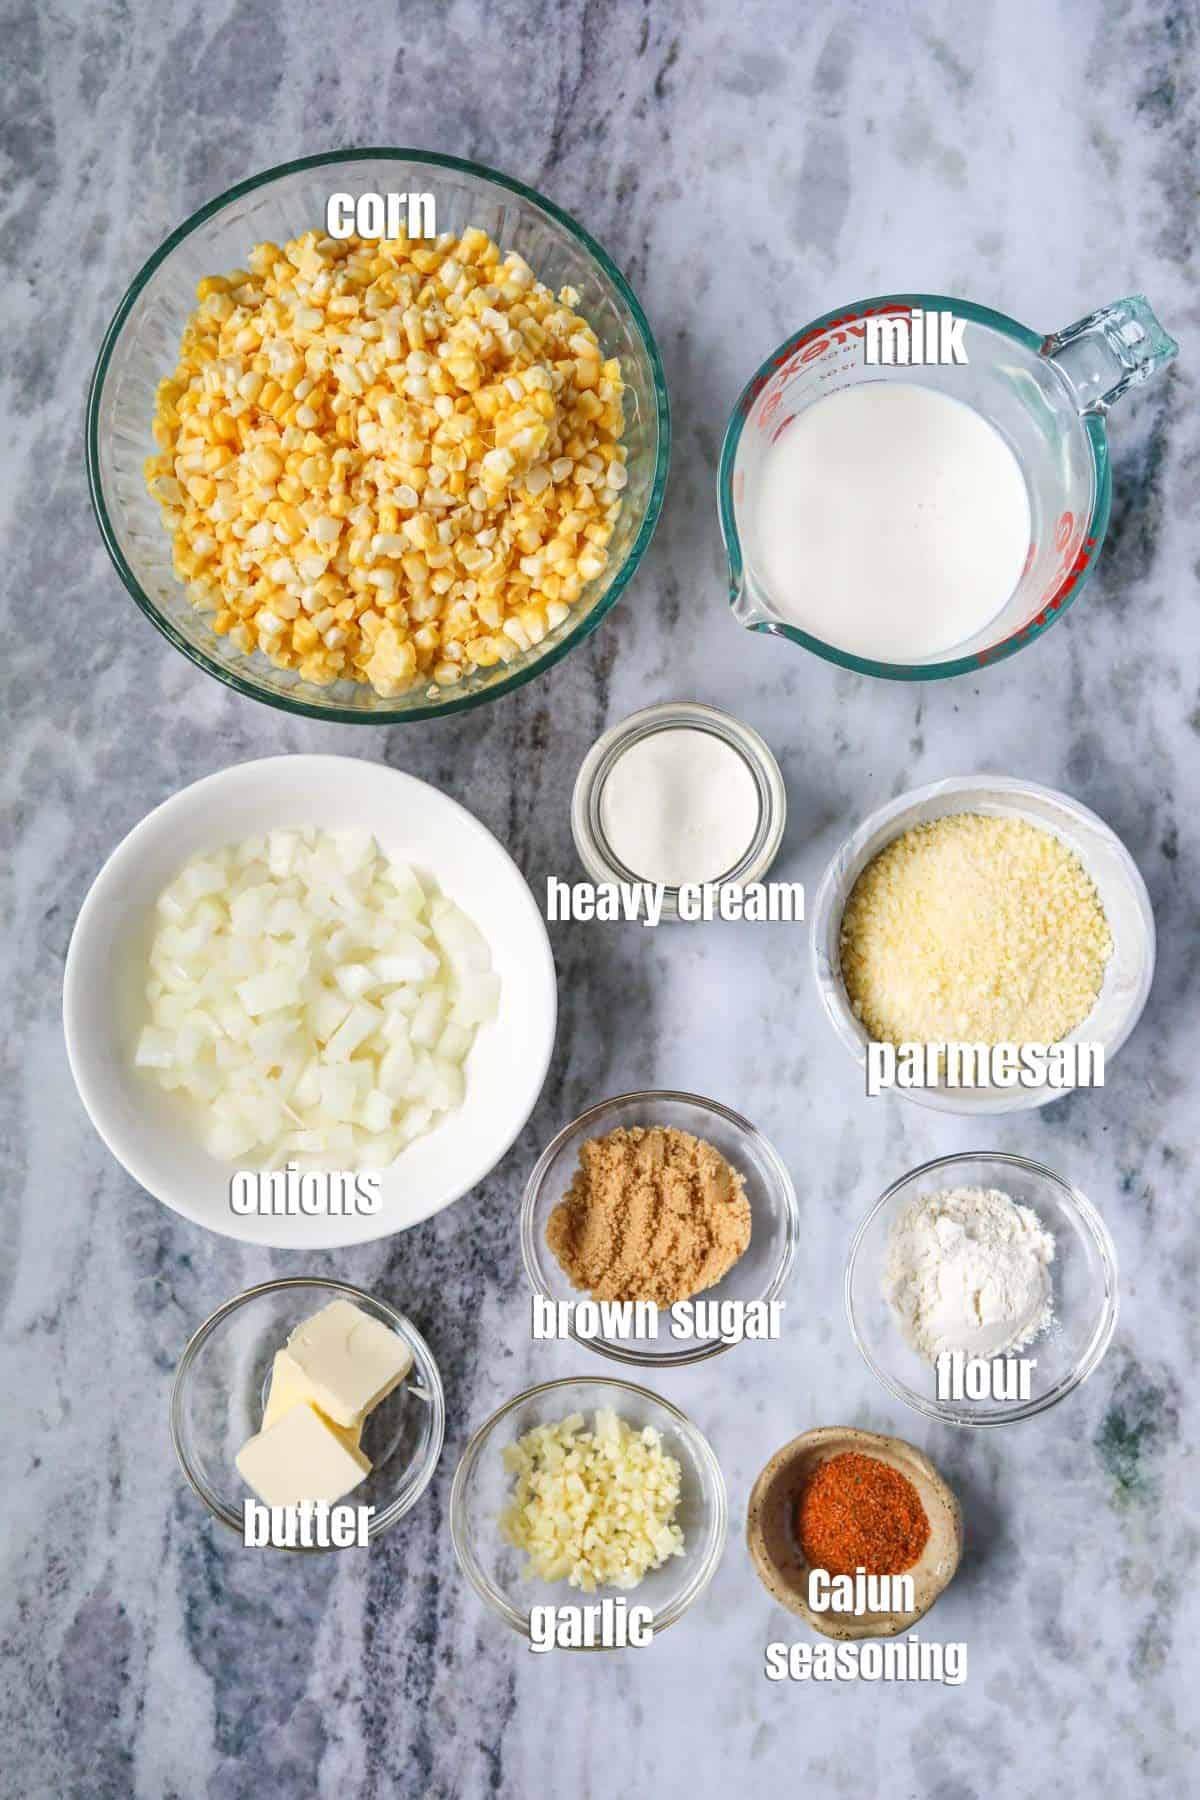 Ingredients for making homemade creamed corn arranged on a gray marble surface.